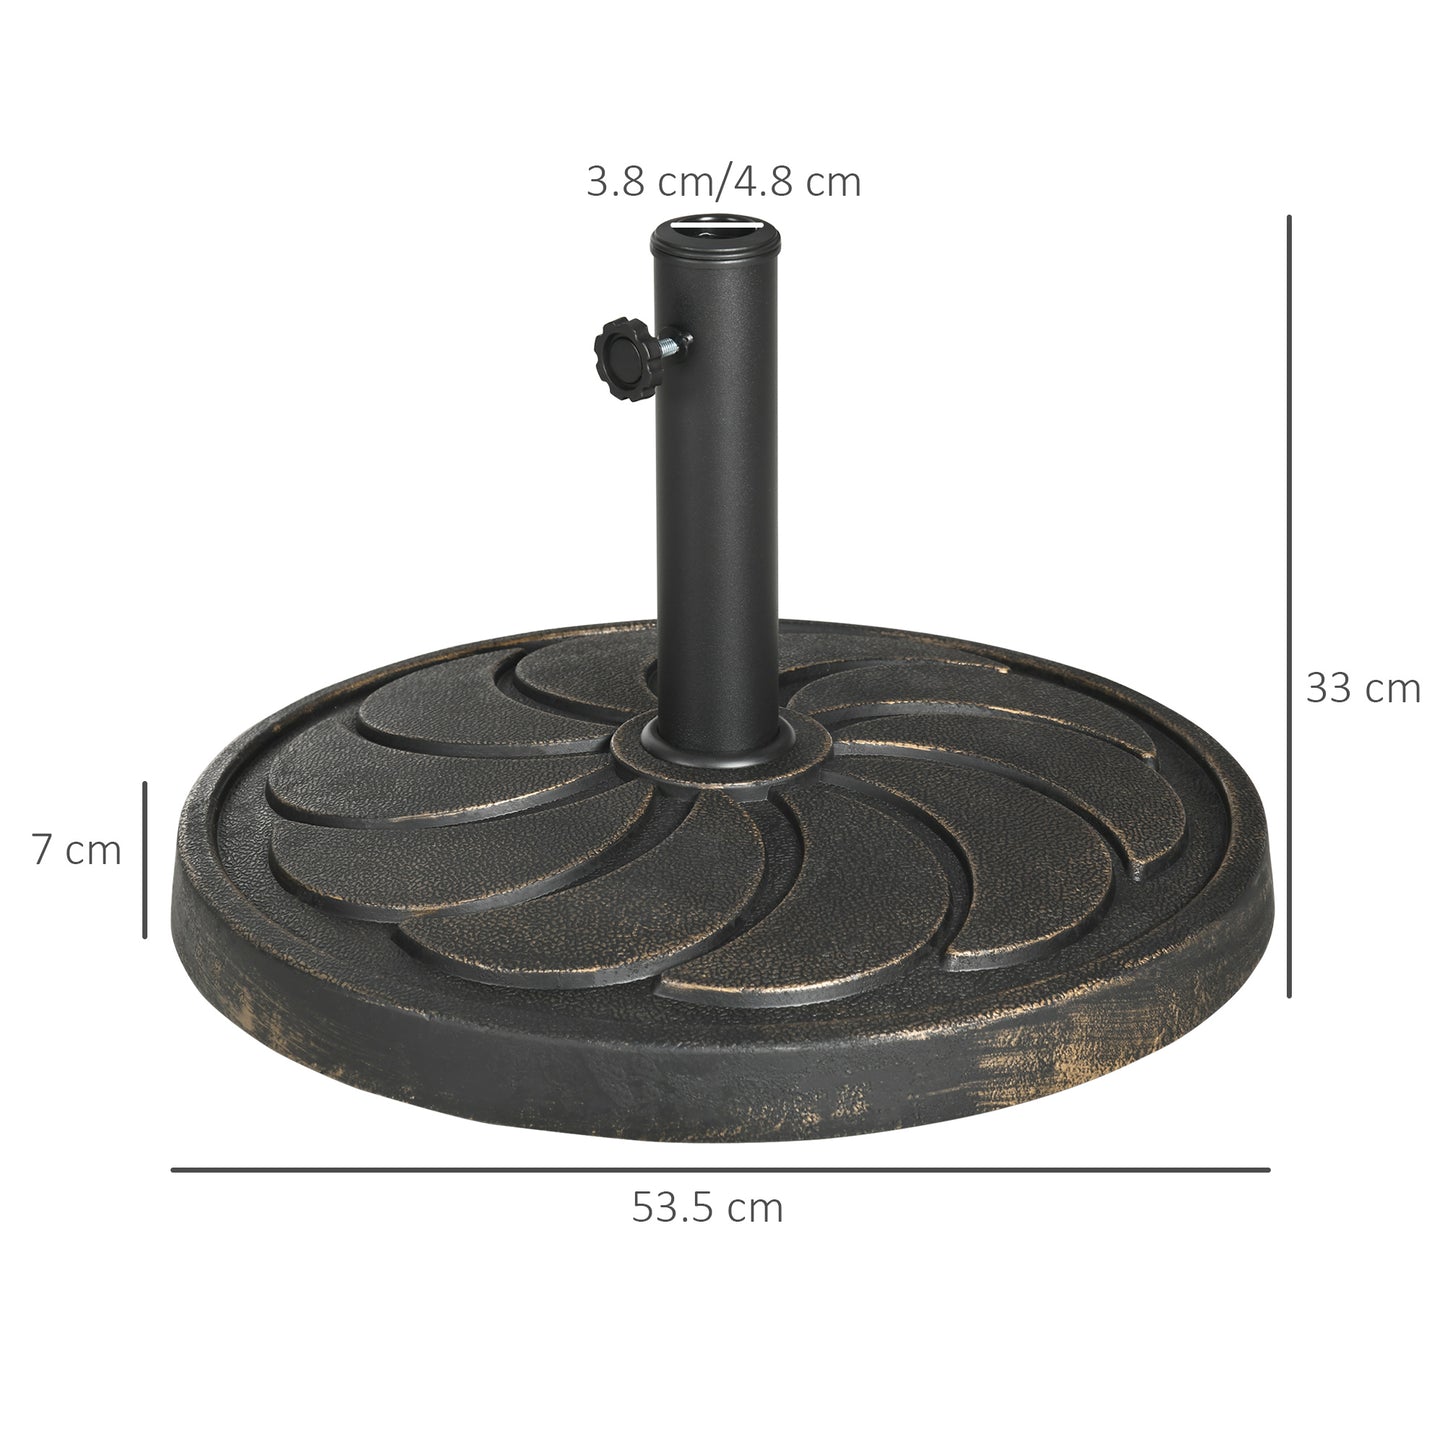 Outsunny 18kg Resin Garden Parasol Base, Round Outdoor Market Umbrella Stand Weight for Poles of Φ38mm to Φ48mm, Bronze